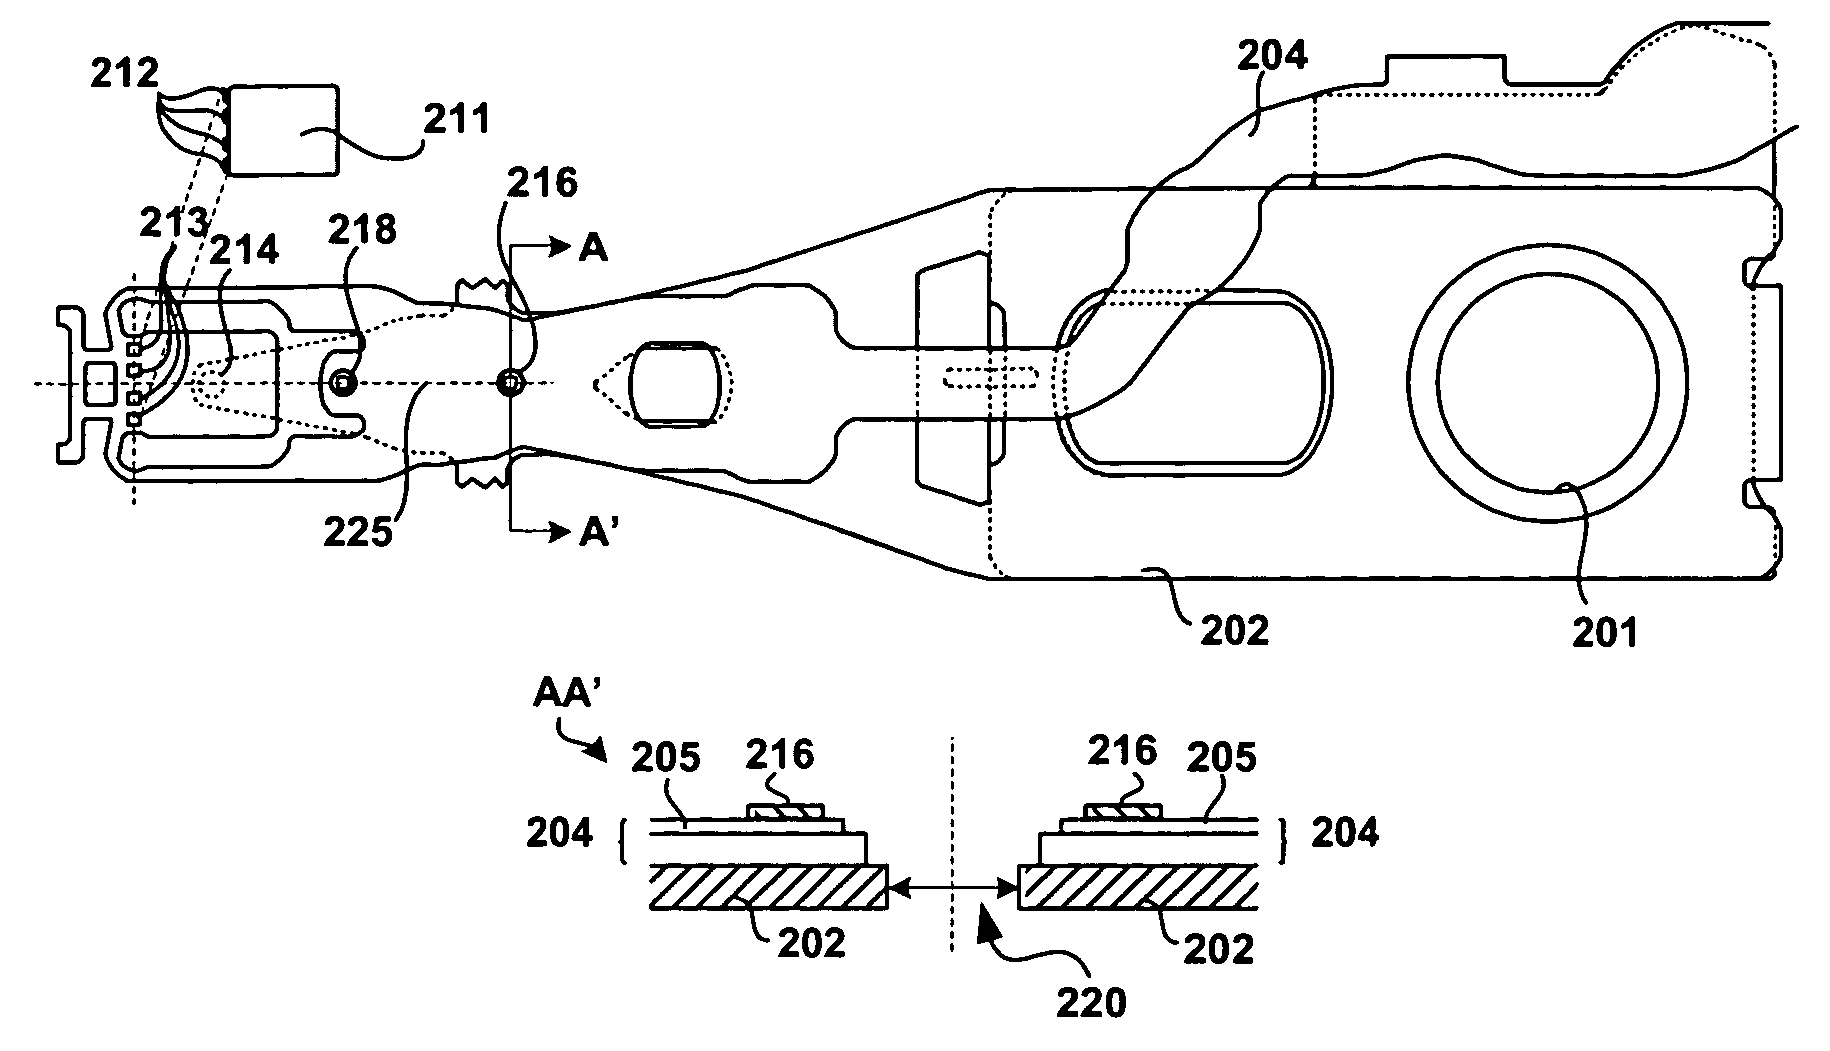 Disk drives, head stack, head gimbal and suspension assemblies having positional conductive features